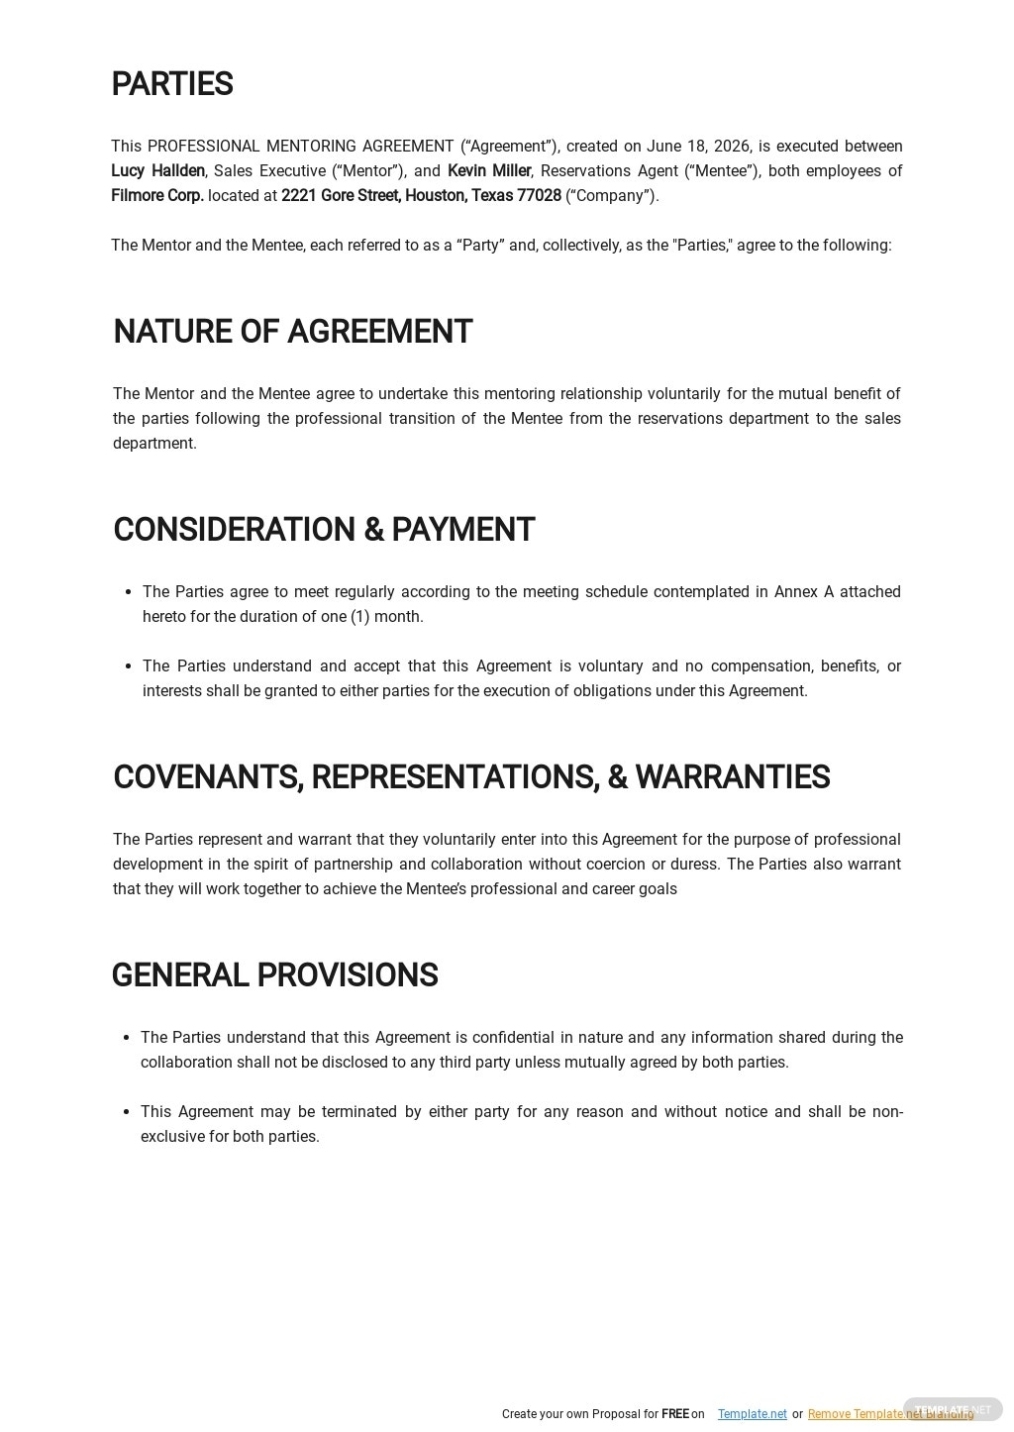 Free Professional Mentoring Agreement Template – Word | Template Throughout Music Equipment Rental Agreement Template